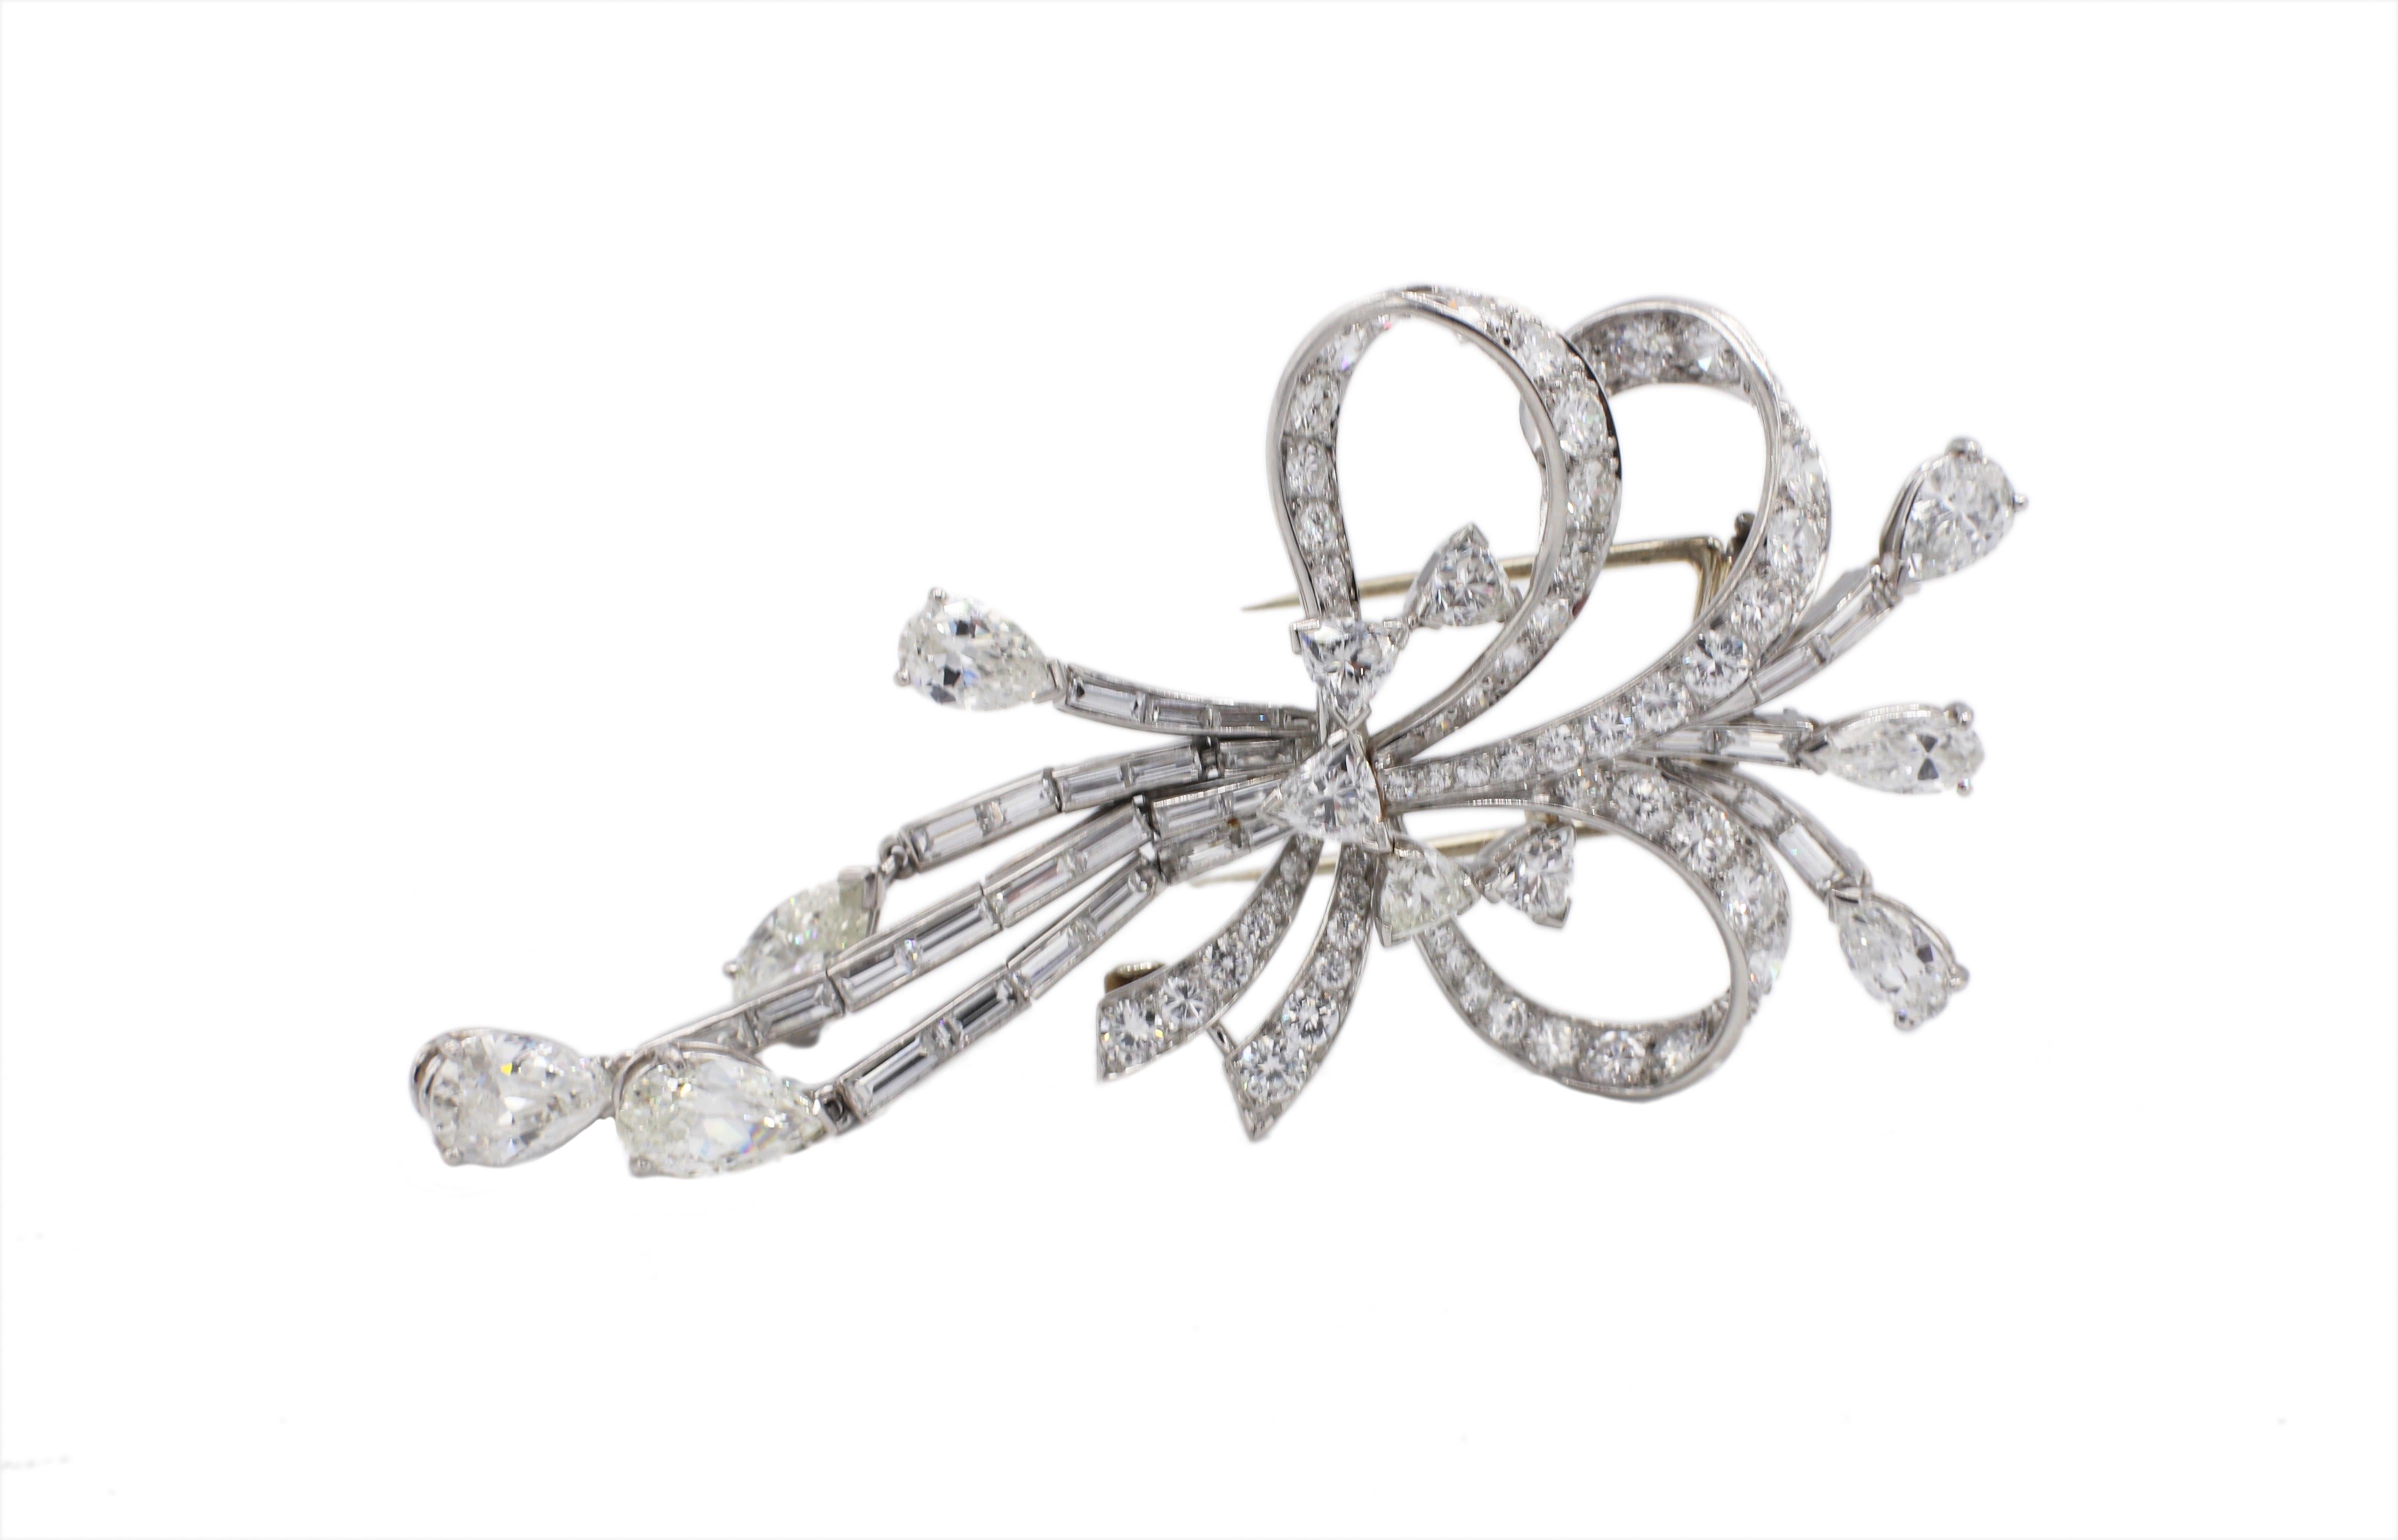 Platinum 10 Carat Diamond Ribbon Bow Brooch Pin 
Metal: Platinum
Weight: 19.37 grams
Diamonds: Approx. 10.50 CTW G-H VS (3.80 pear shapes, 1.50 baguettes, 1.20 trillions, 4.00 round brilliant) 
Length: 2.85 inches
Width: 1.4 inches
